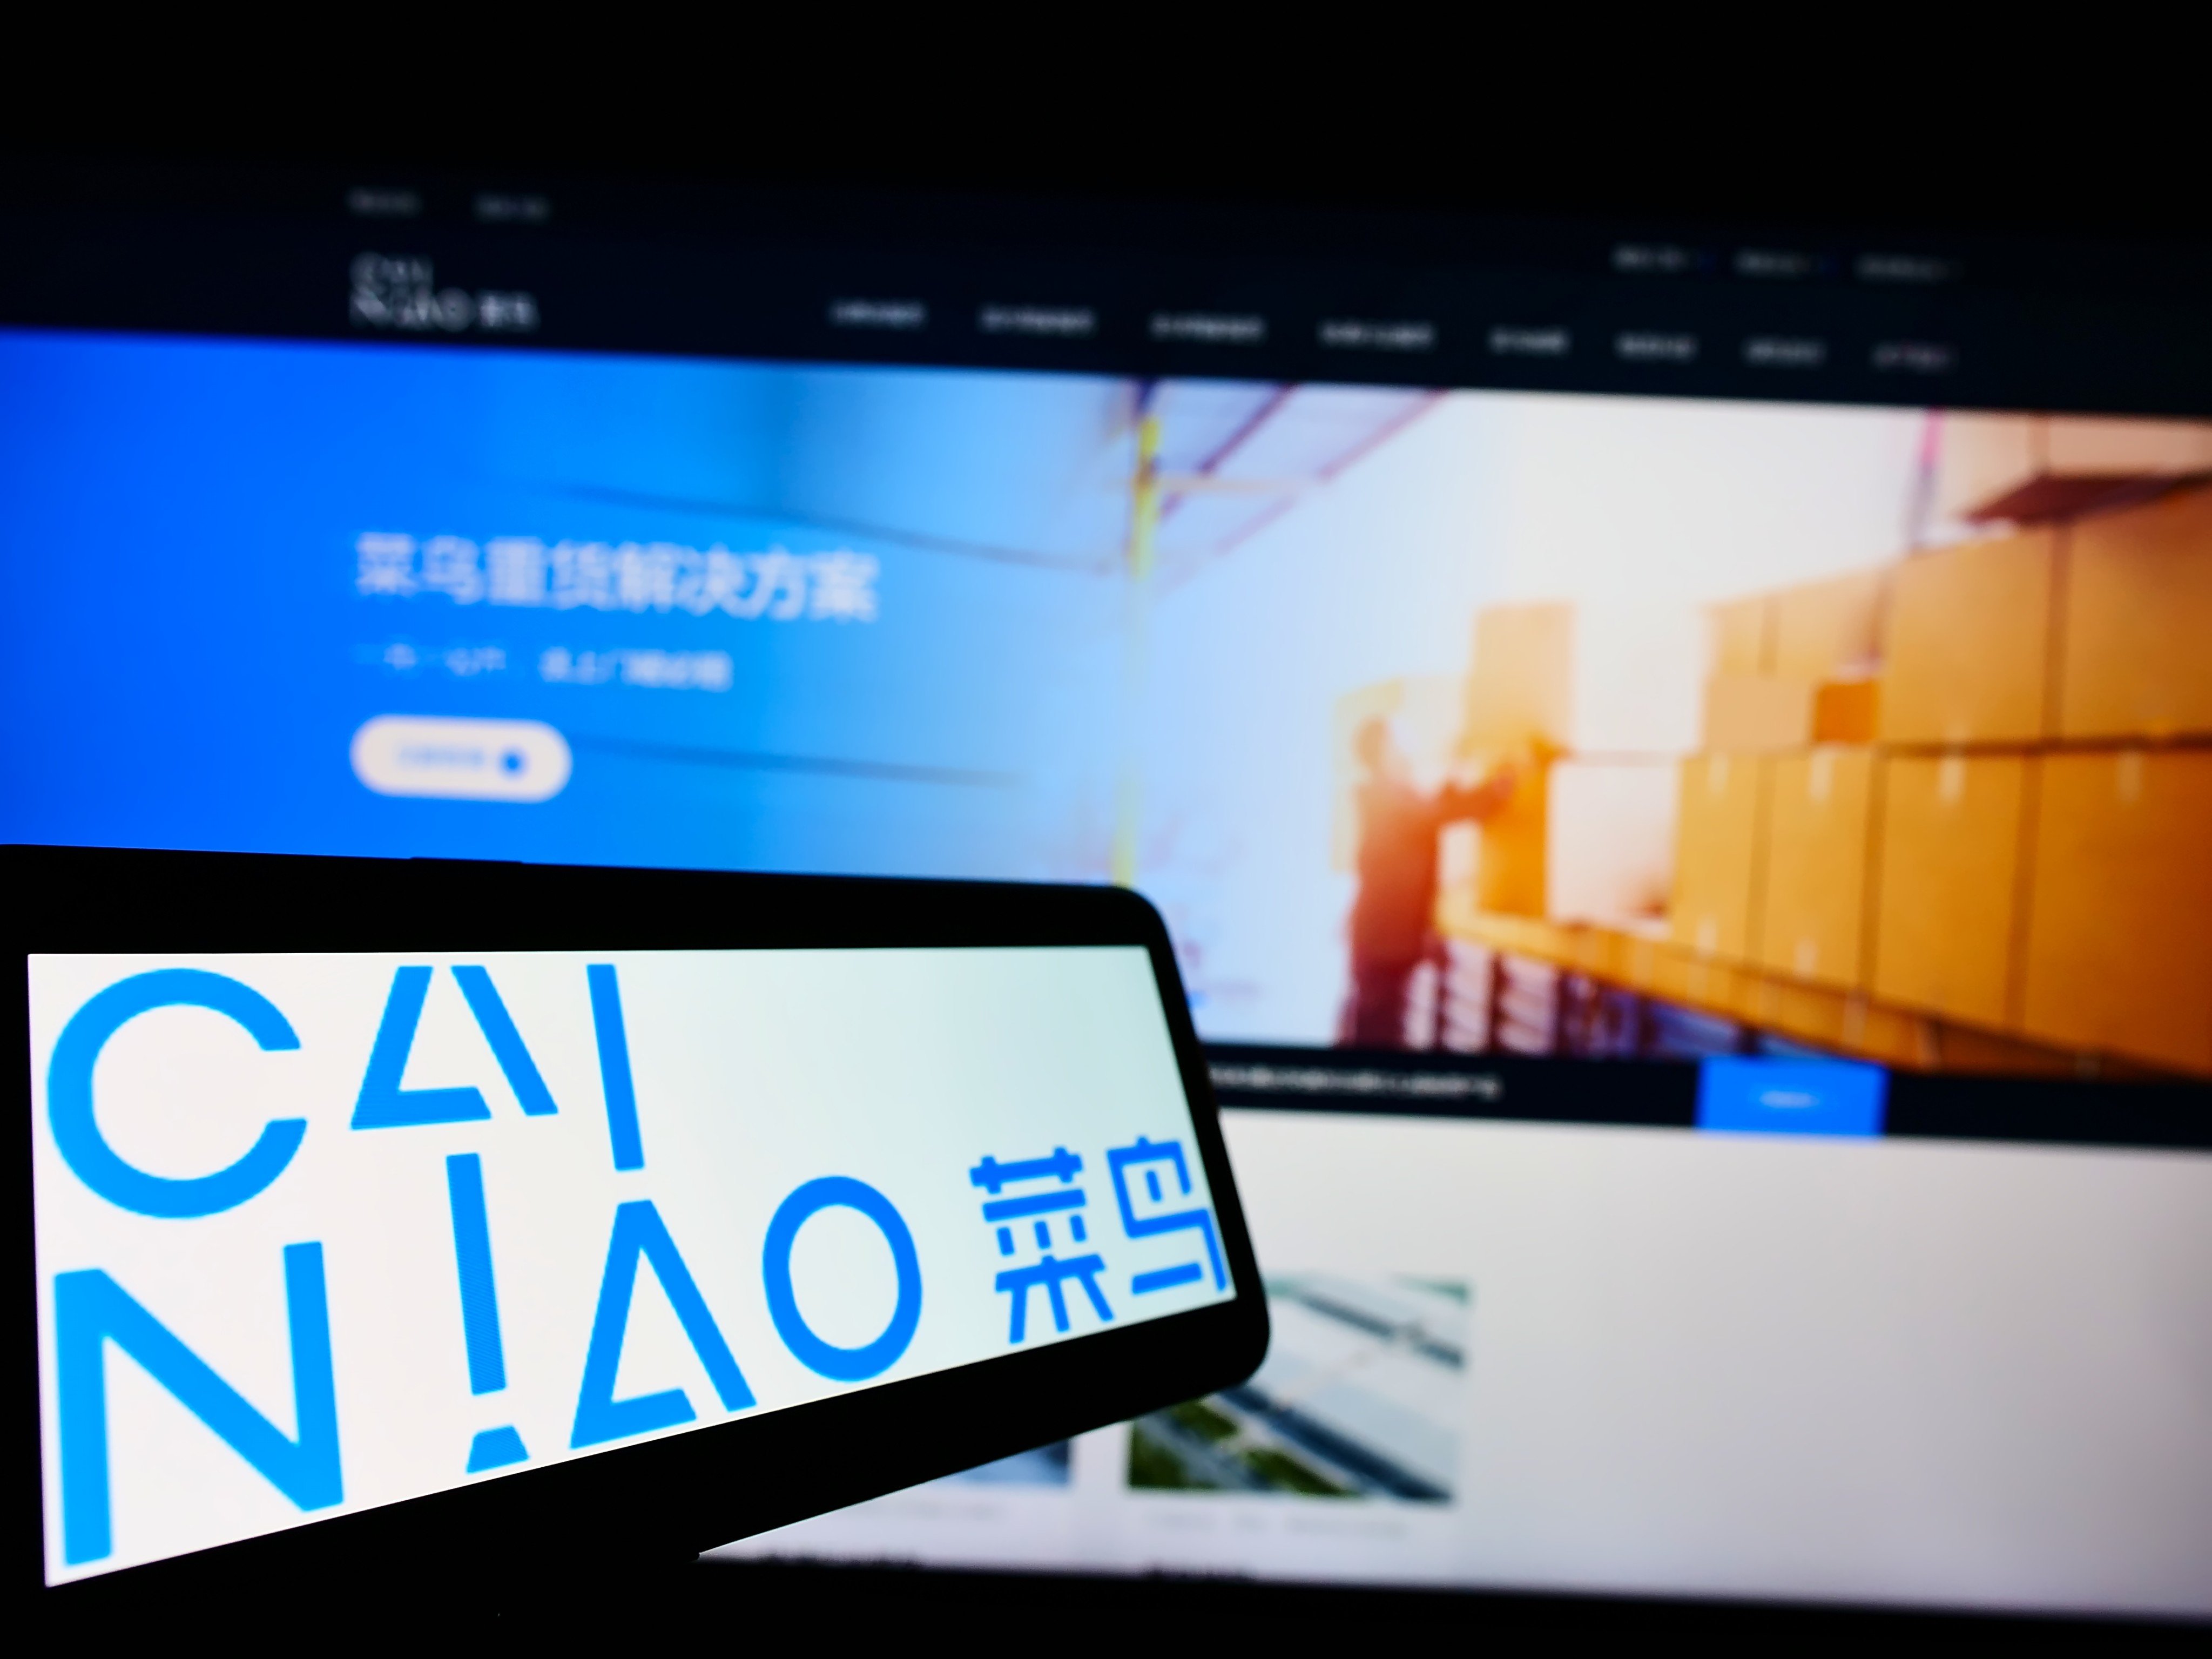 The new financial incentive to employees of Cainiao Smart Logistics Network shows parent Alibaba Group Holding’s focus on keeping morale high at an integral business under the e-commerce giant. Photo: Shutterstock